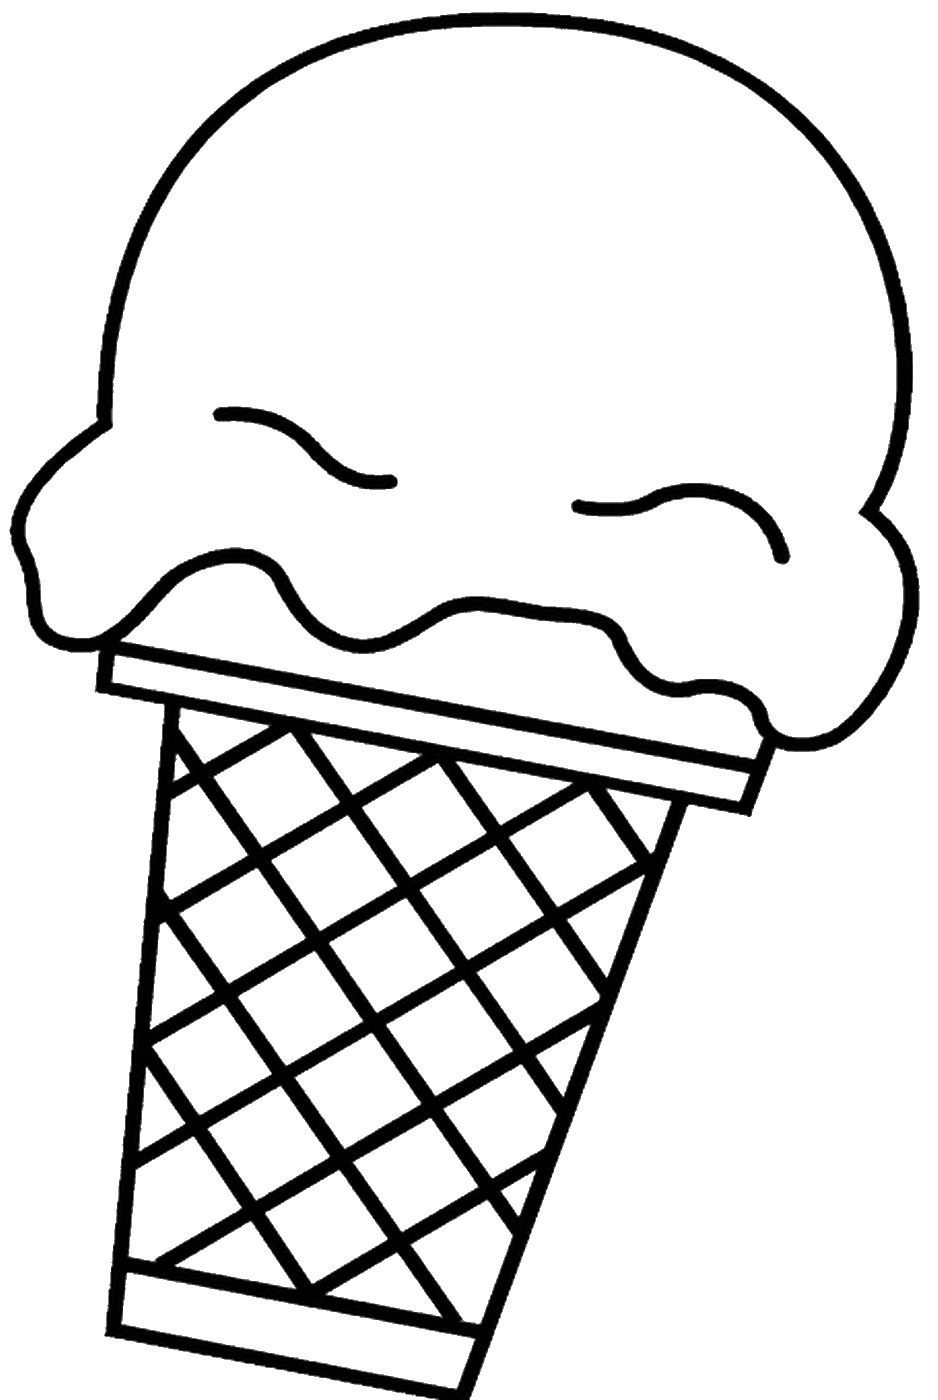 icecream-coloring-pages